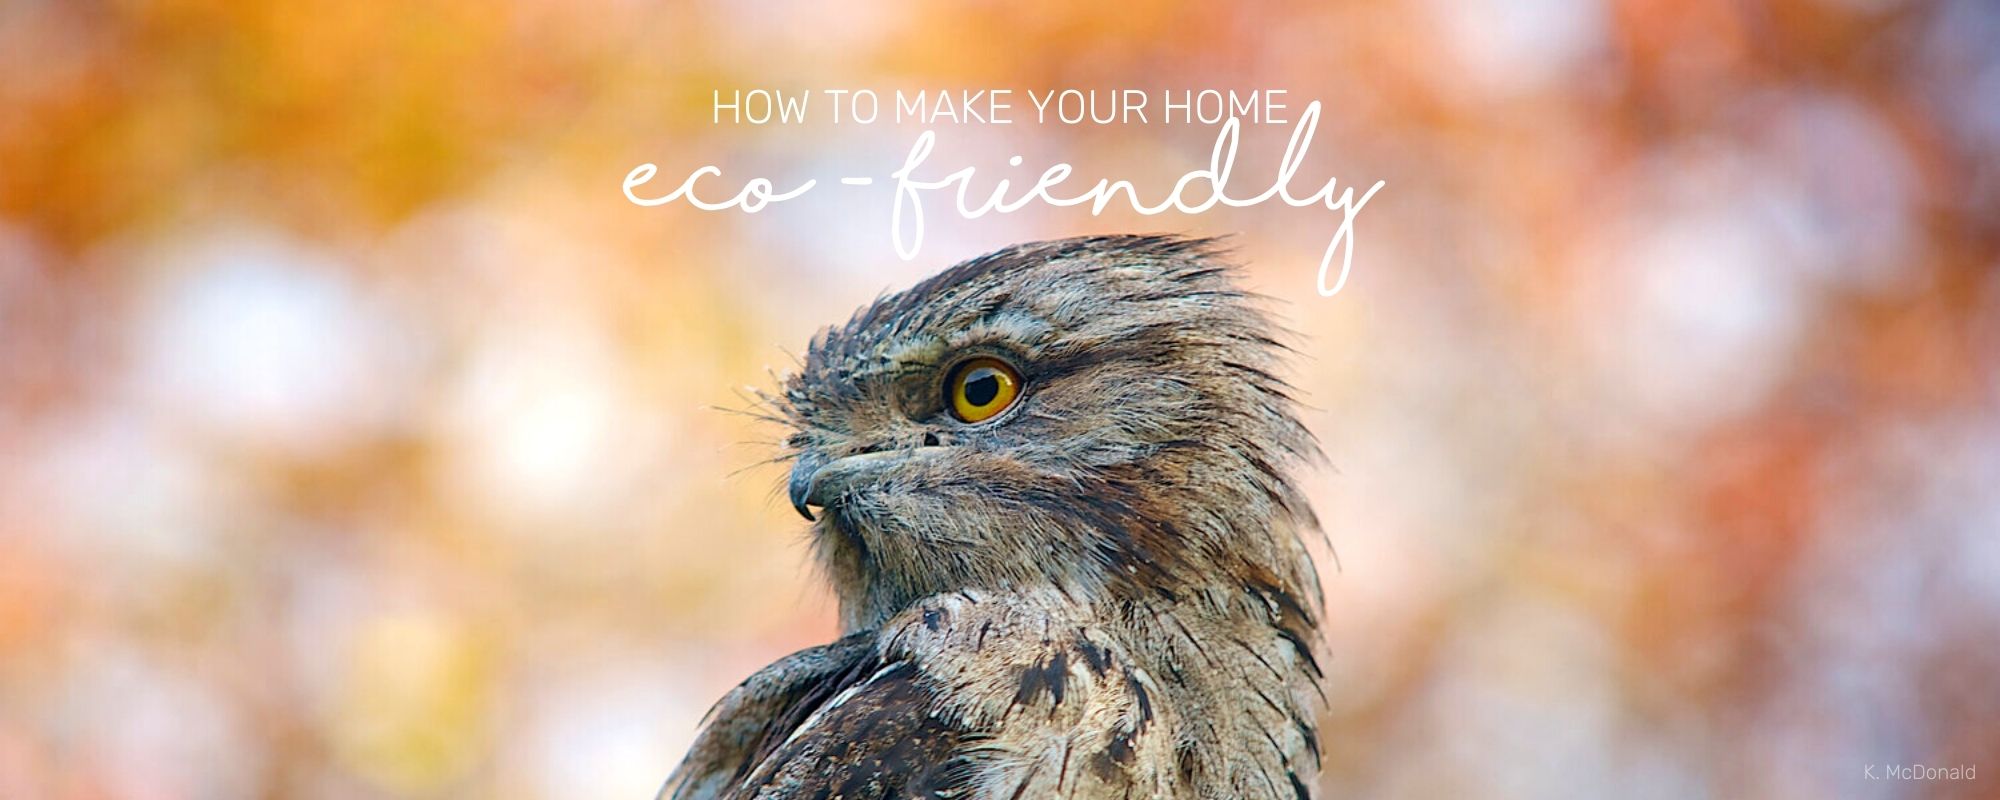 HOW TO MAKE YOUR HOME ECO-FRIENDLY